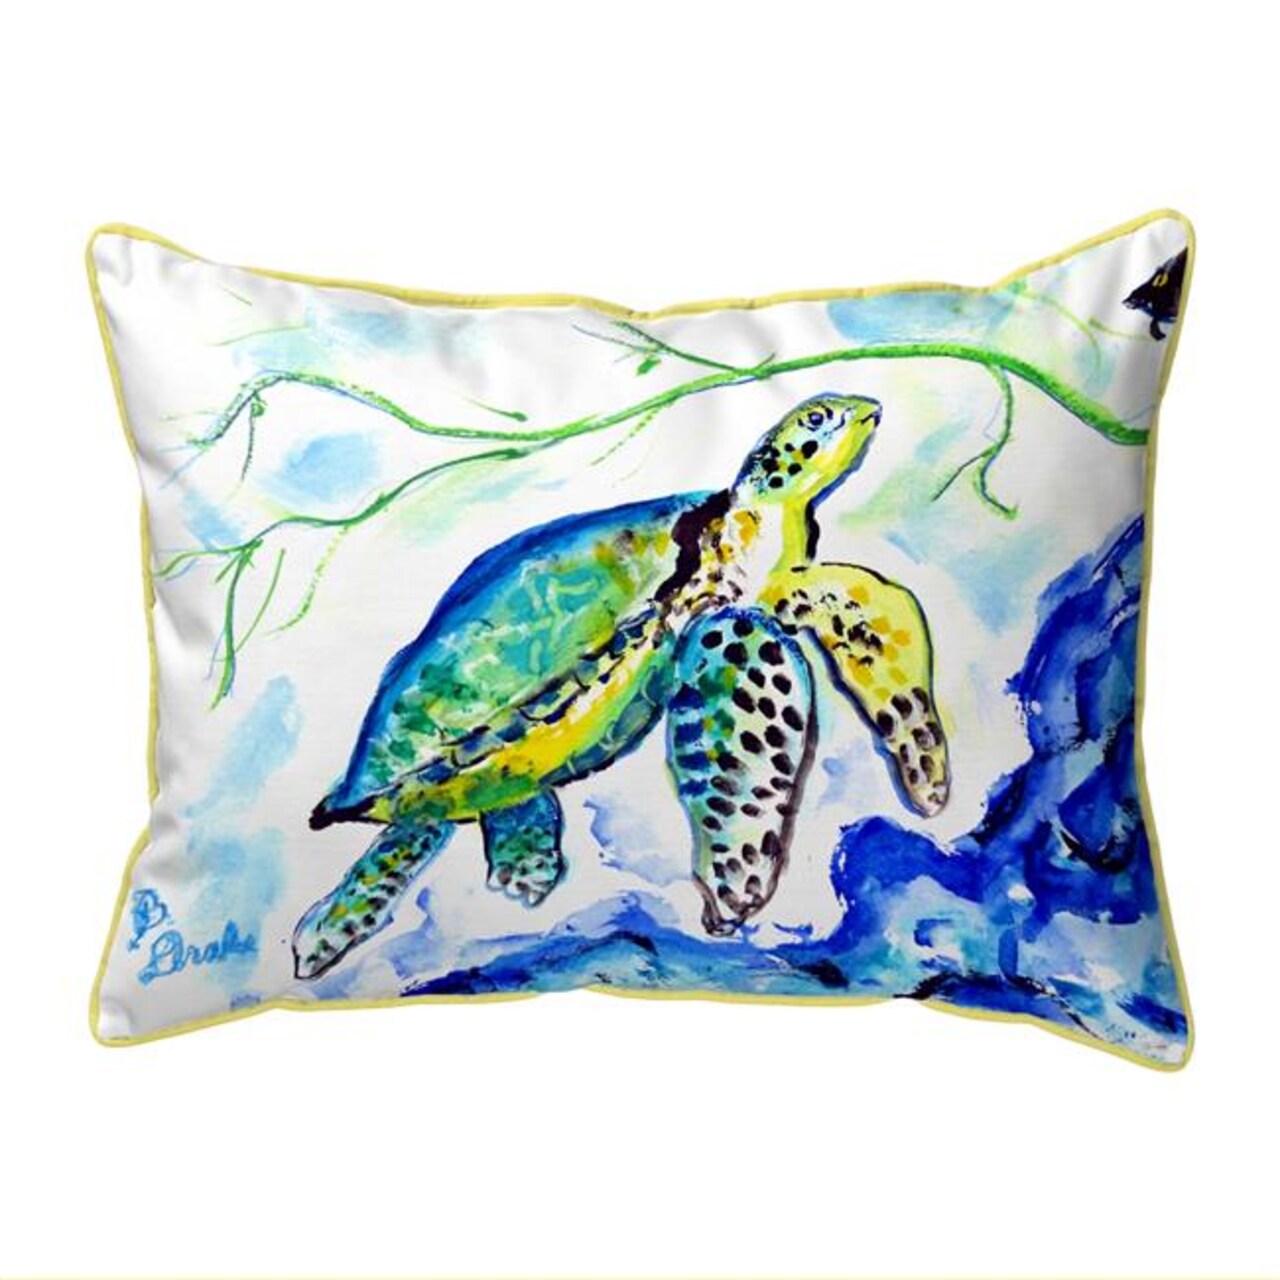 Betsy Drake HJ833 16 x 20 in. Yellow Sea Turtle Large Pillow